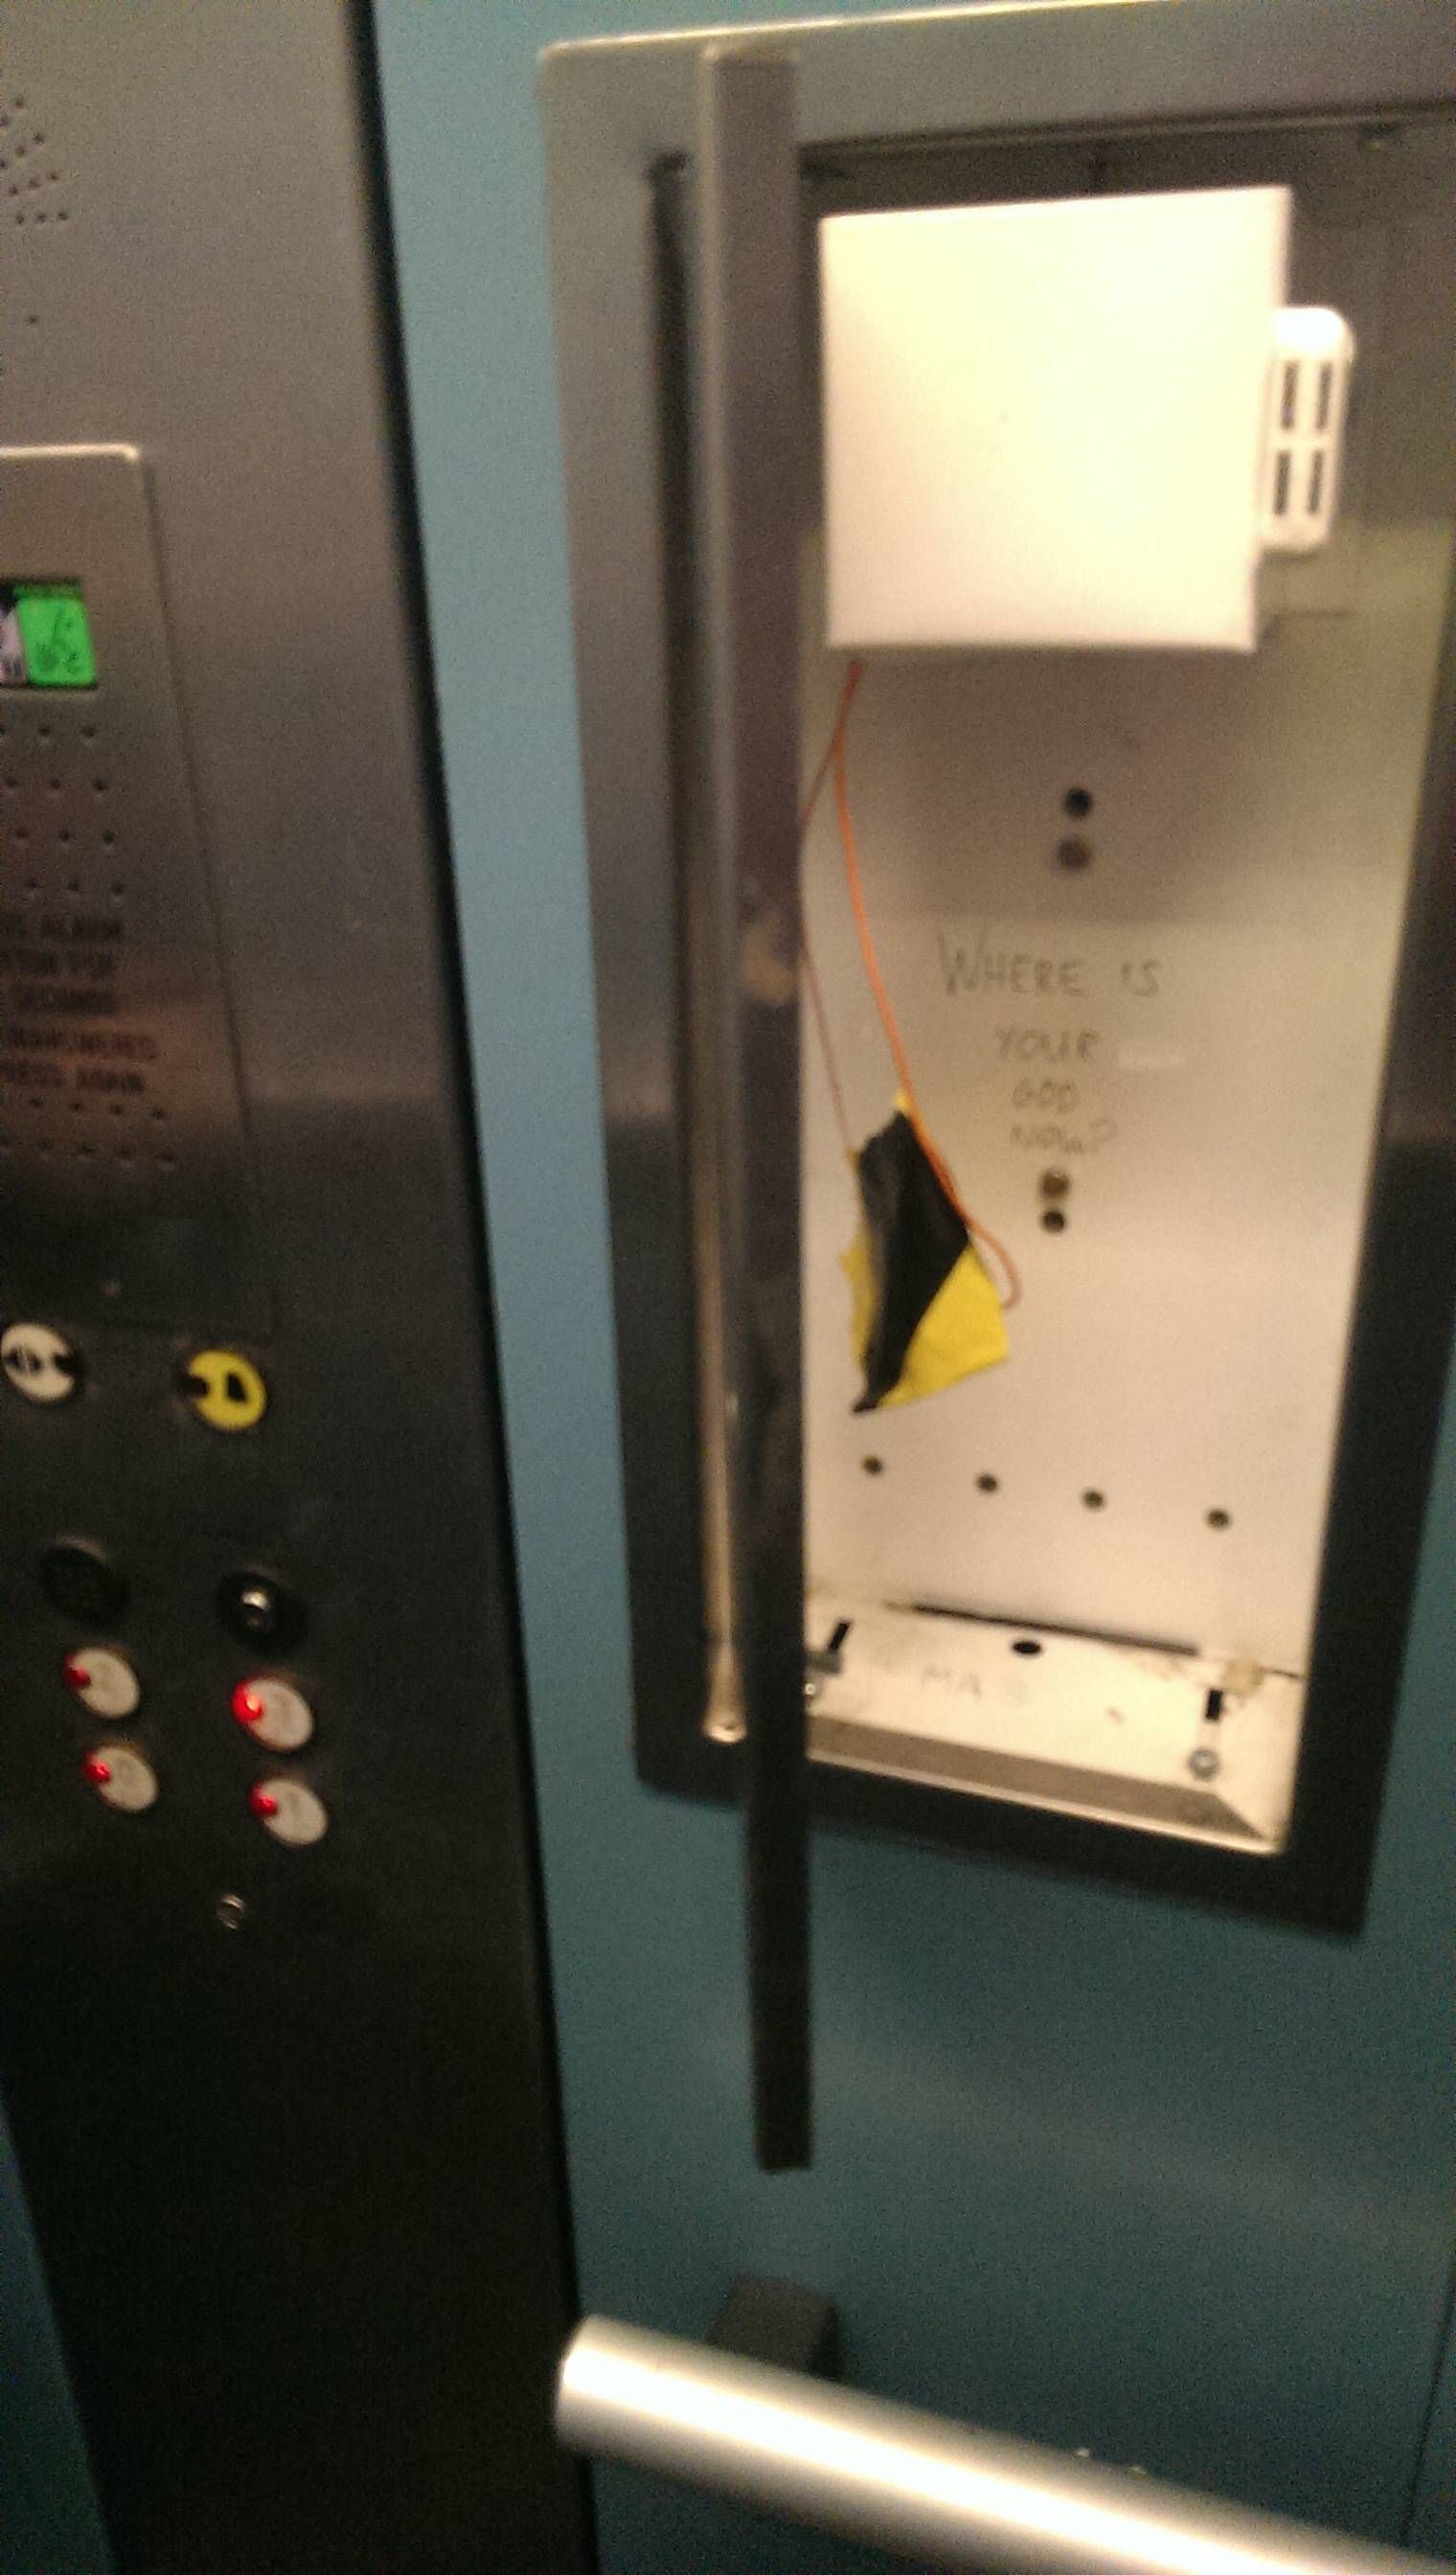 The elevator I was in broke down. I looked in the emergency phone box because I had no signal and this is all there was.